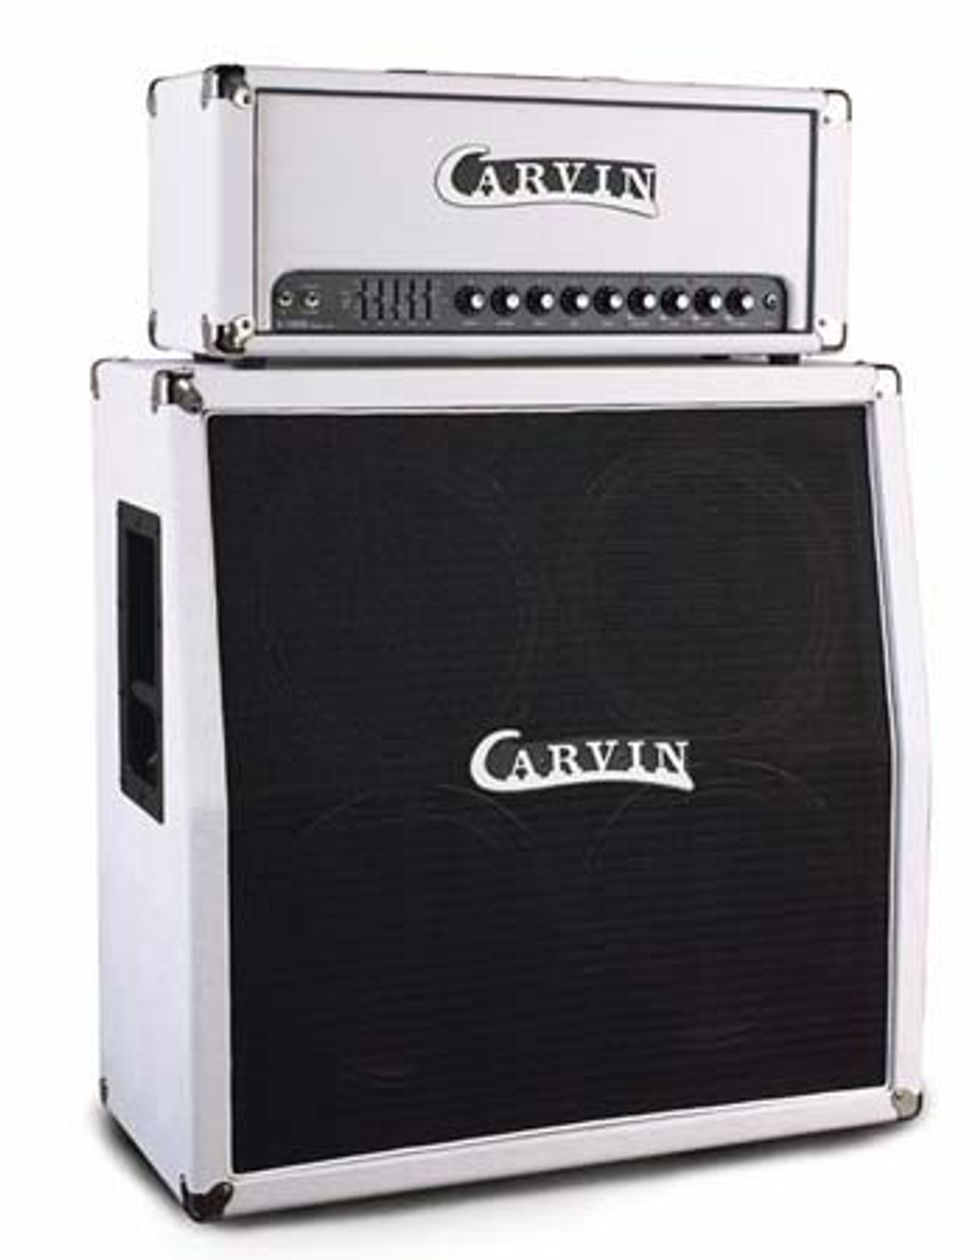 Review Carvin X 100b Amplifier Amp Cabinet